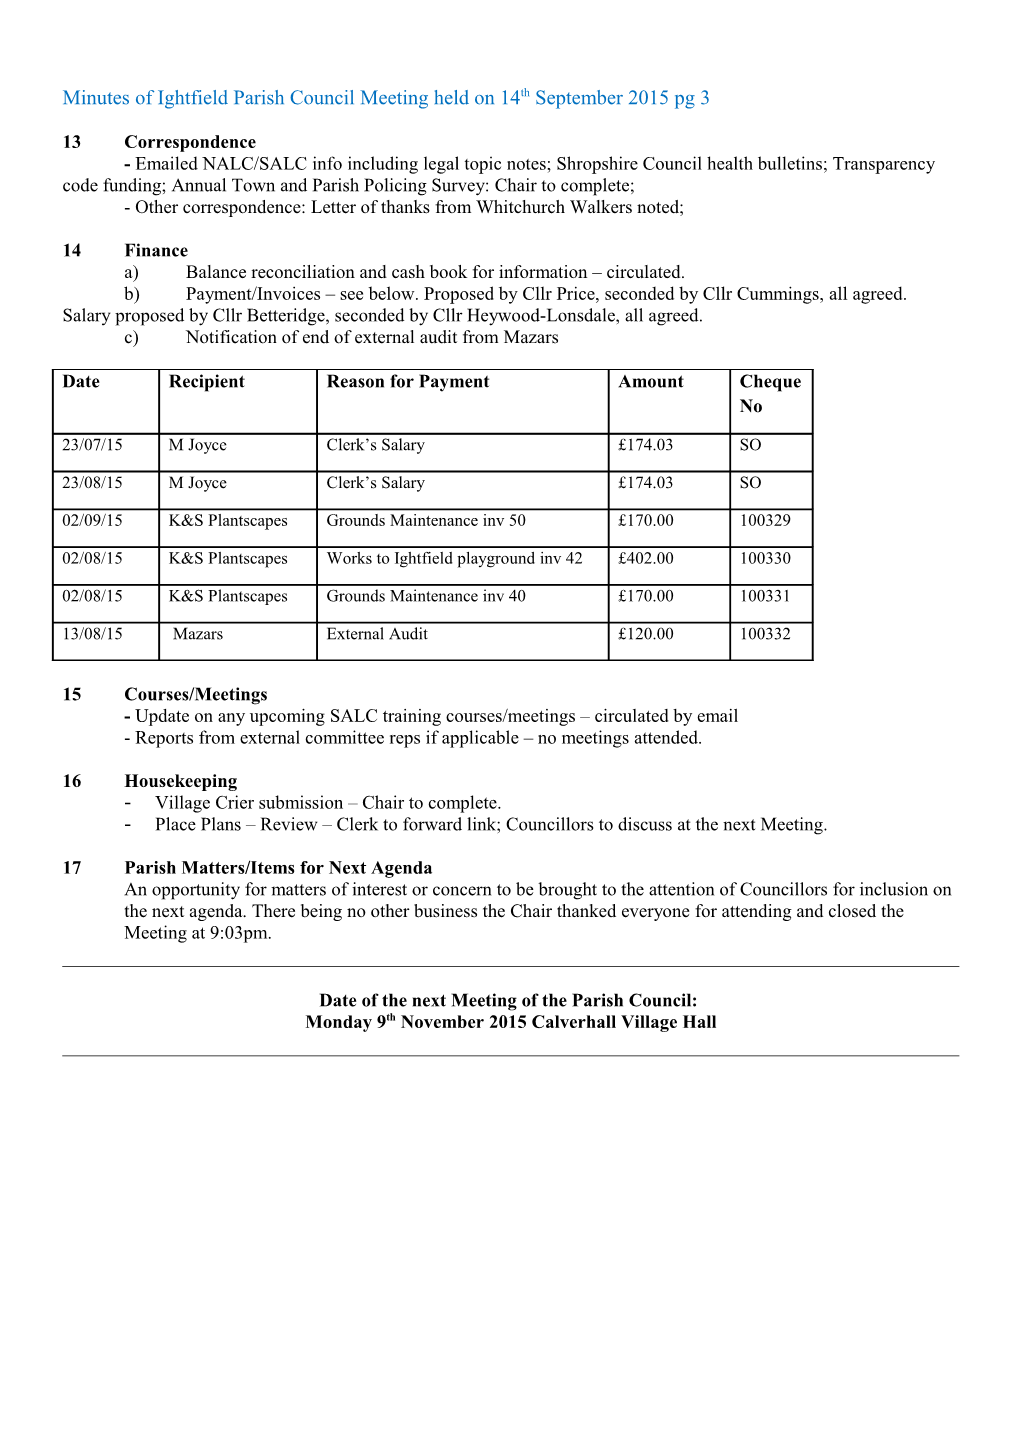 Minutes of the Meeting of Ightfield Parish Coucil 14Th September 2015